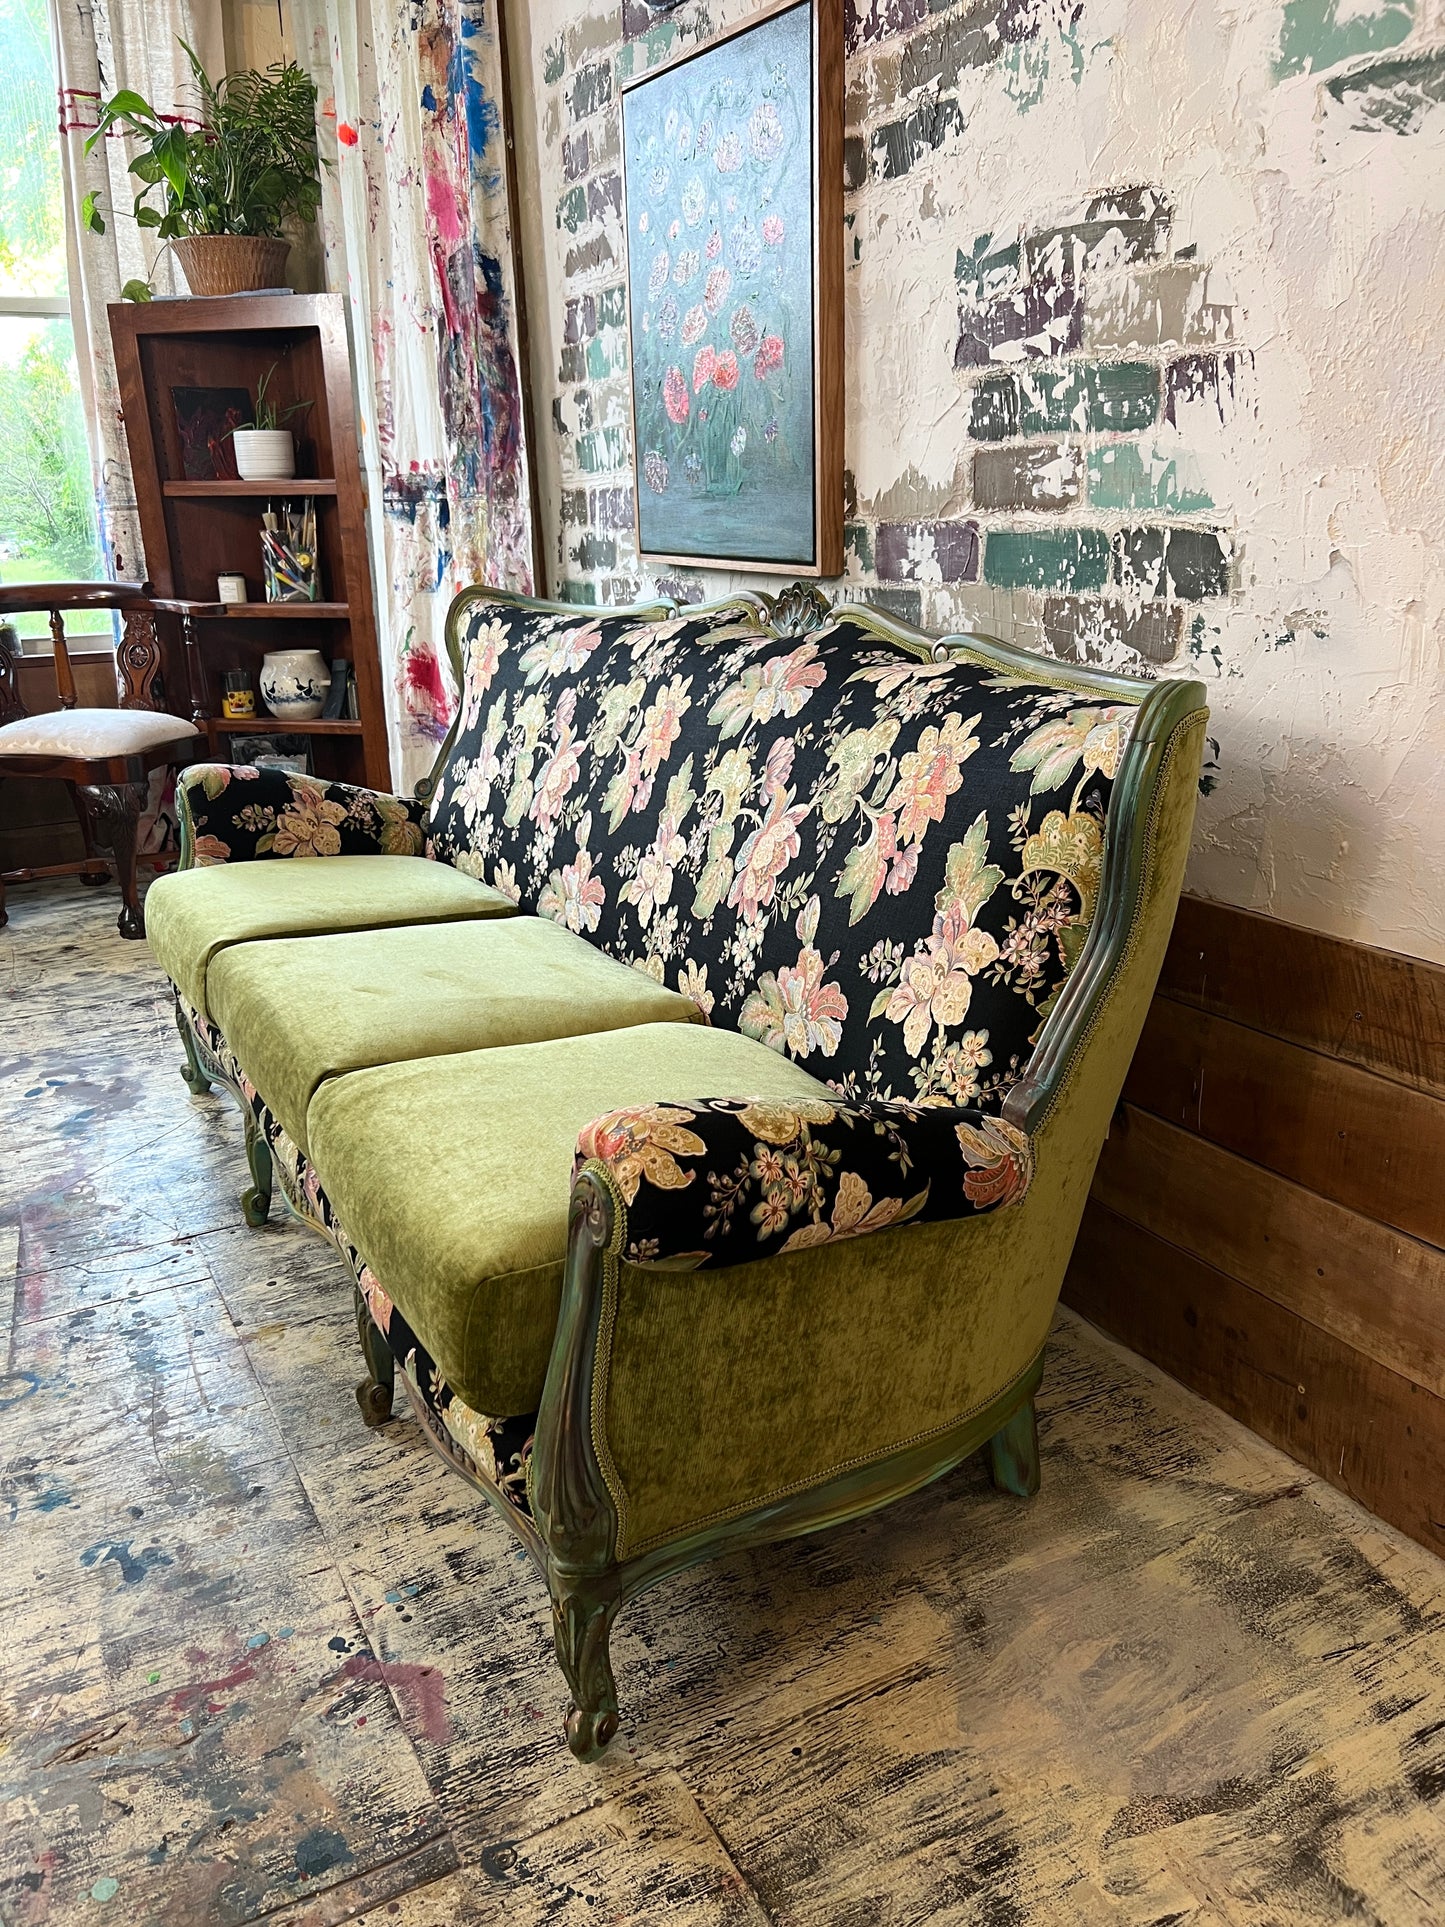 Sofa/Vintage Couch